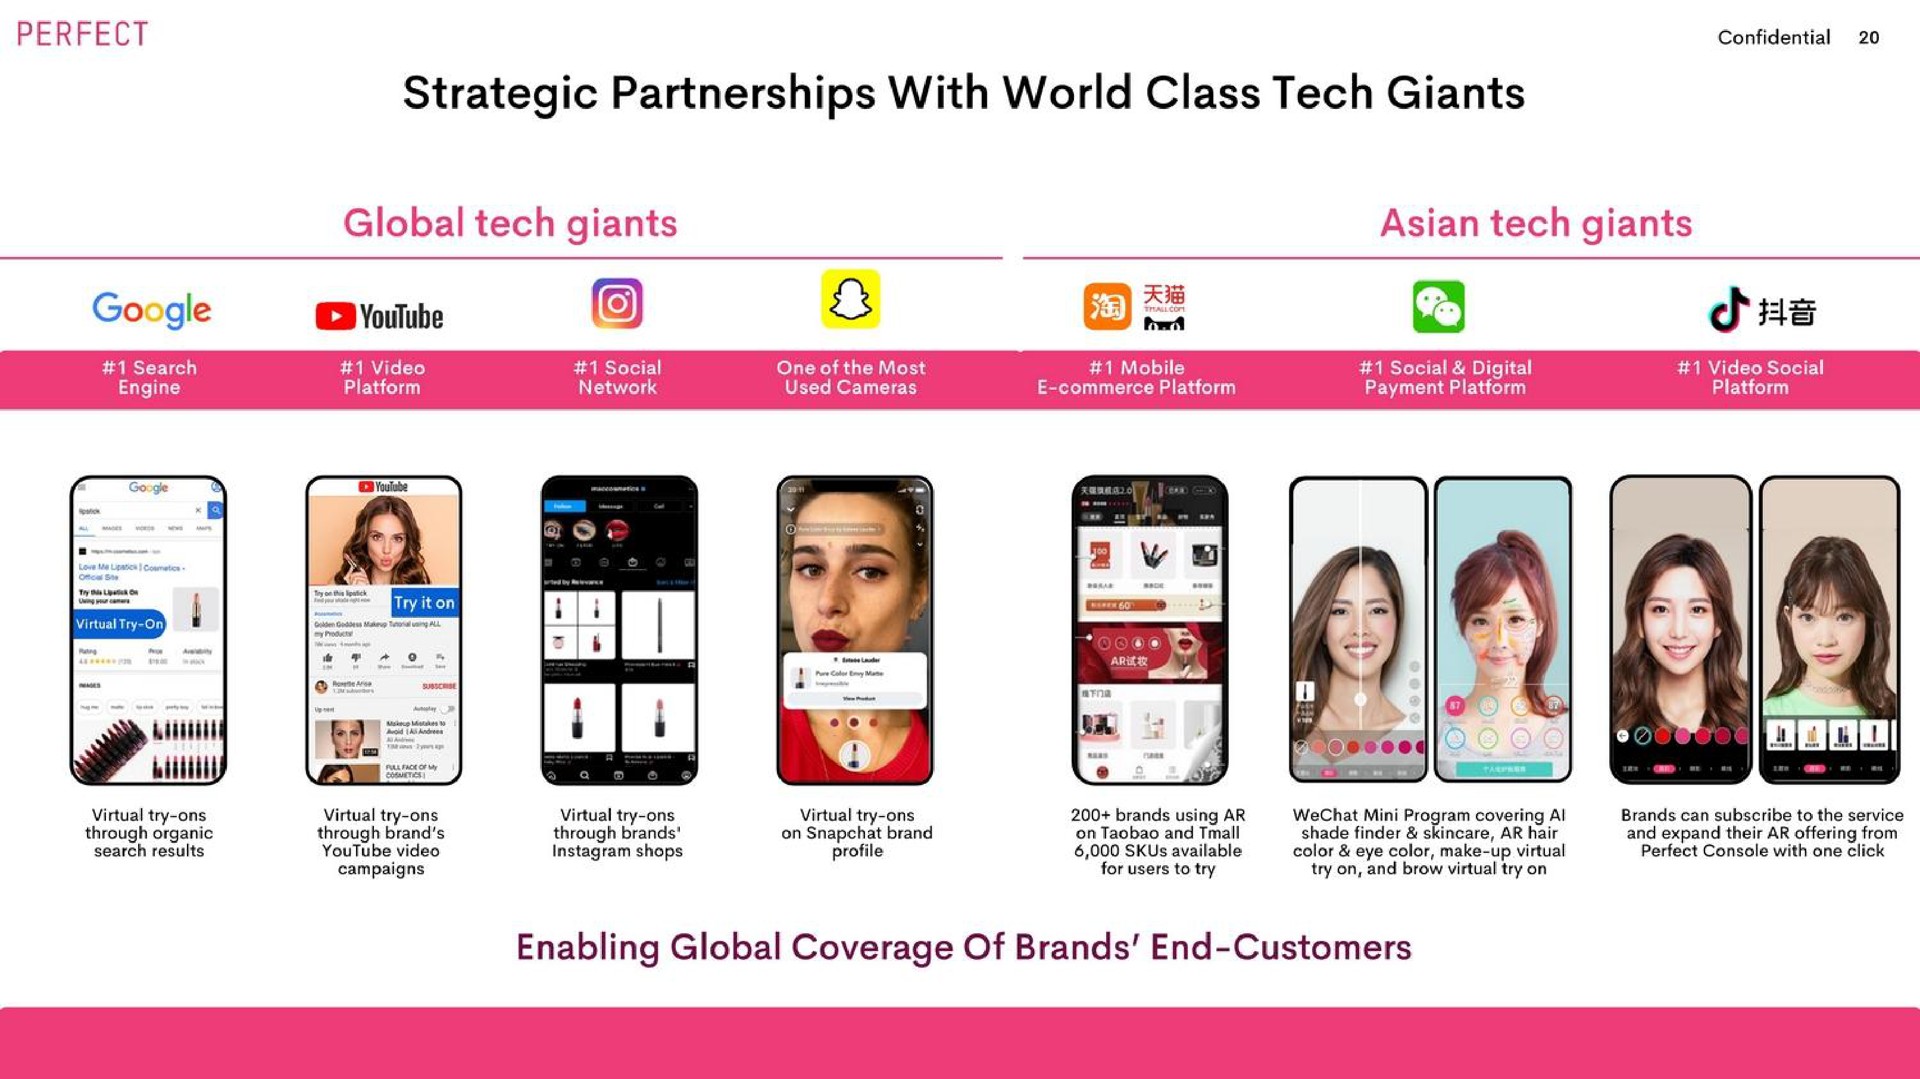 strategic partnerships with world class tech giants global tech giants tech giants dis enabling global coverage of brands end customers | Perfect